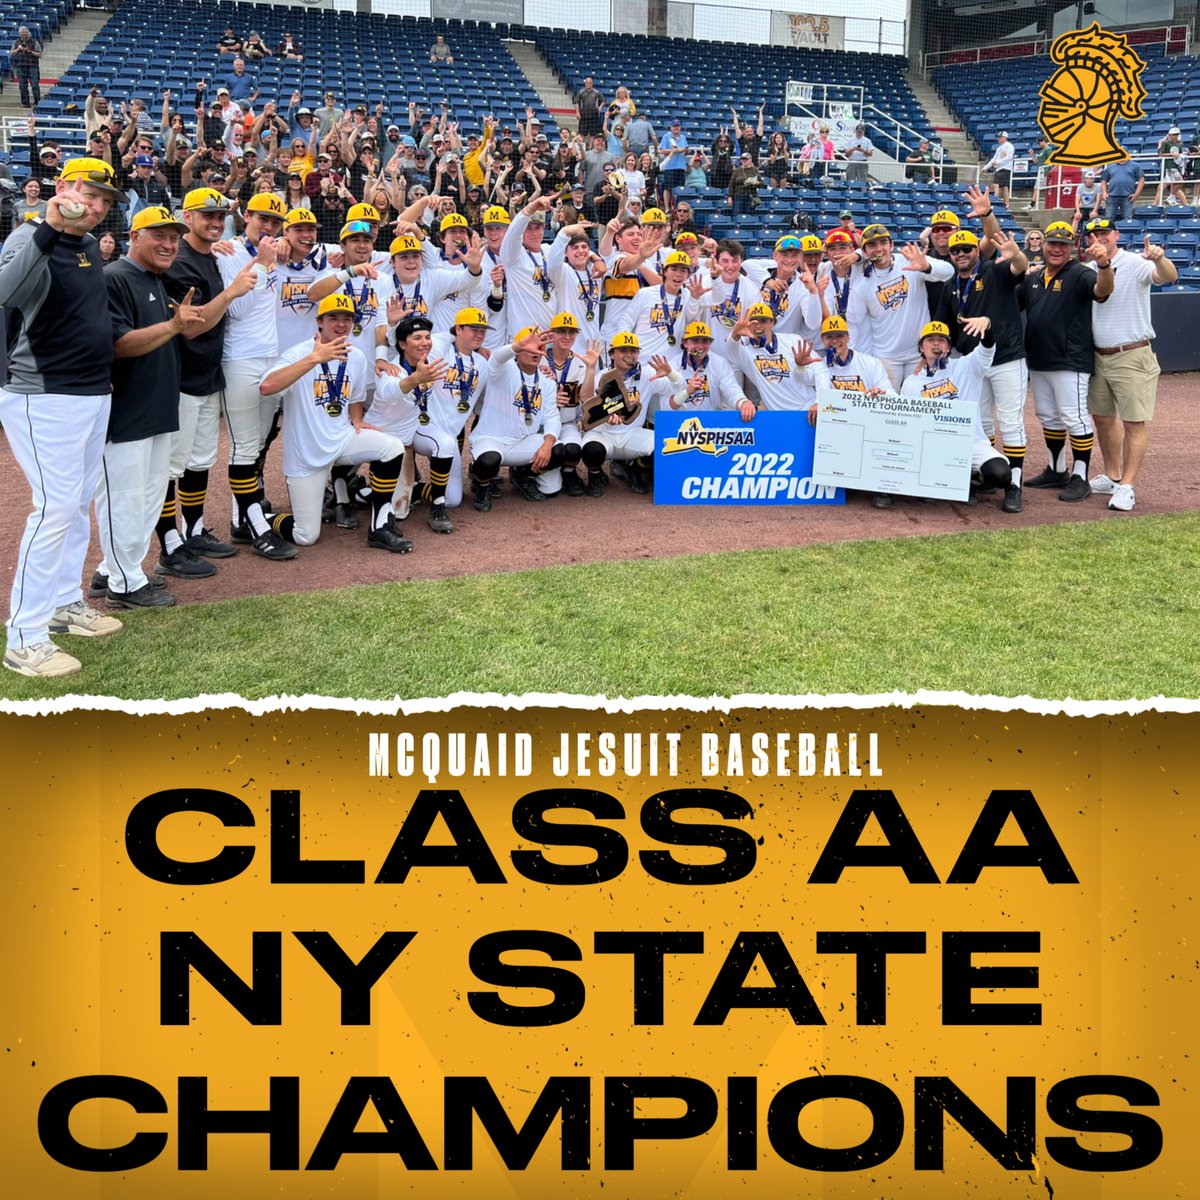 CLASS AA NYS CHAMPIONS! What a team, what a run, what a year! Back to back state titles with a few Covid years in between. This team will go down in history as the best of 2022. @CoachFullerMcQ is the best in the business! @McQuaidBaseball @baseballsectv @PickinSplinters